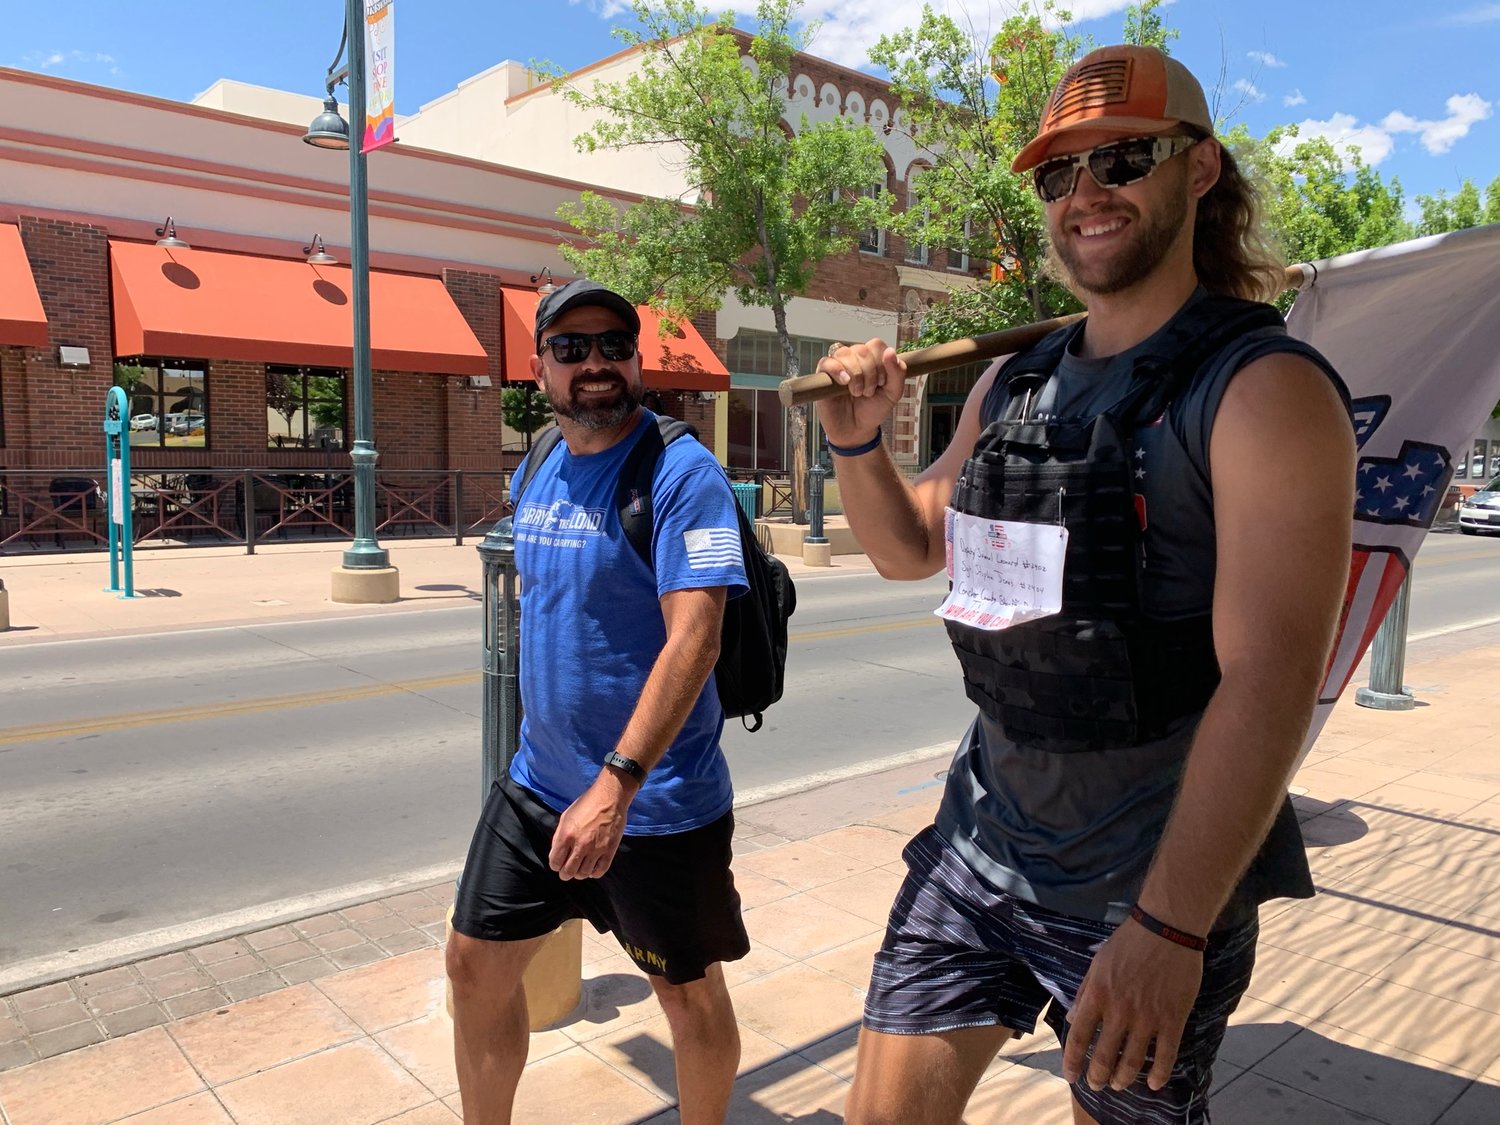 Rocky Everett and Jason Diggins “Carry the Load” through Downtown Las Cruces as part of the nonprofit effort to recognize veterans and first responders who have lost their lives. The Carry the Load events has four relays that converge in Dallas for Memorial Day. The West Coast Relay, which came through Las Cruces May 18, started in Seattle.